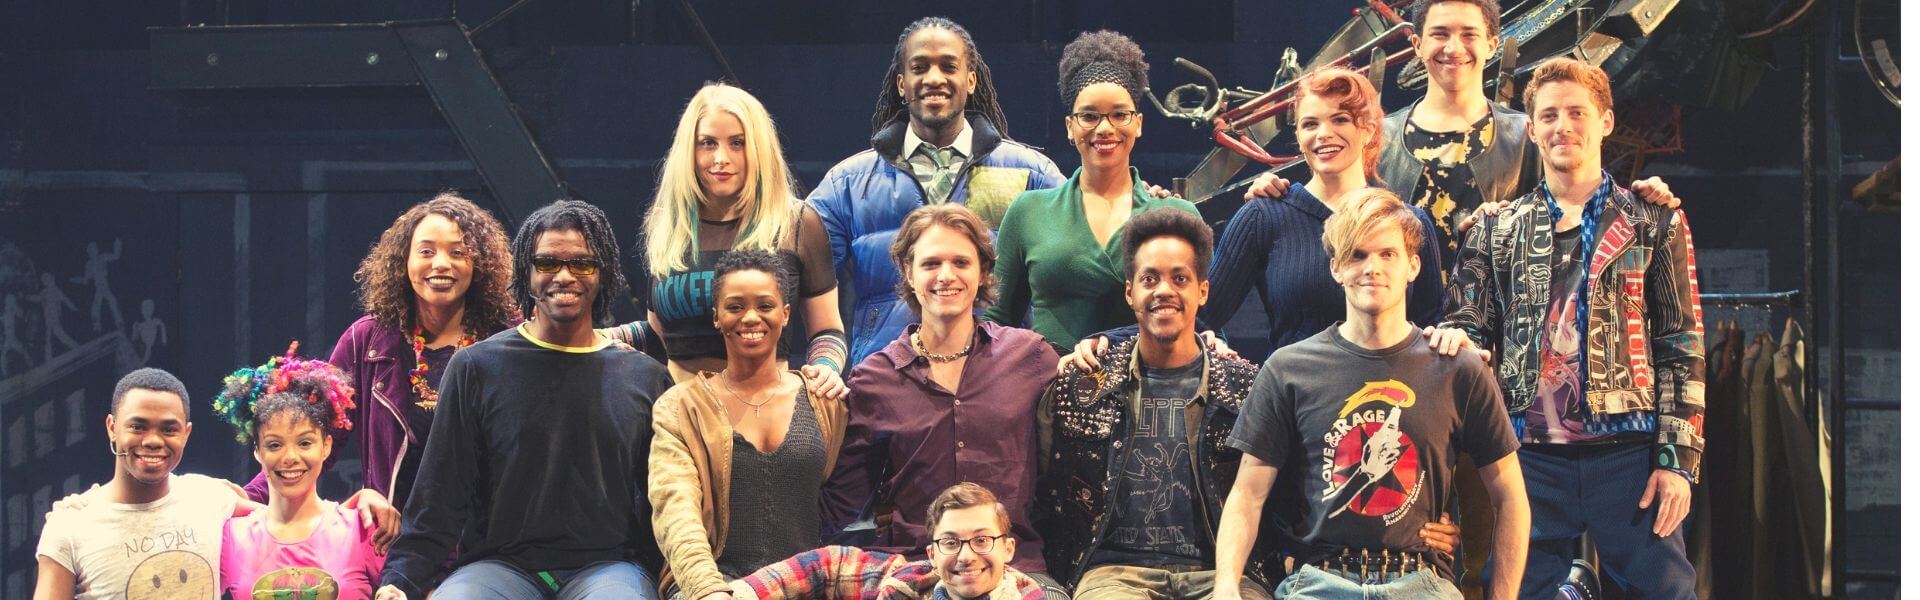 20 Years Later, RENT Resonates Through Timeless Themes - Purdue ...